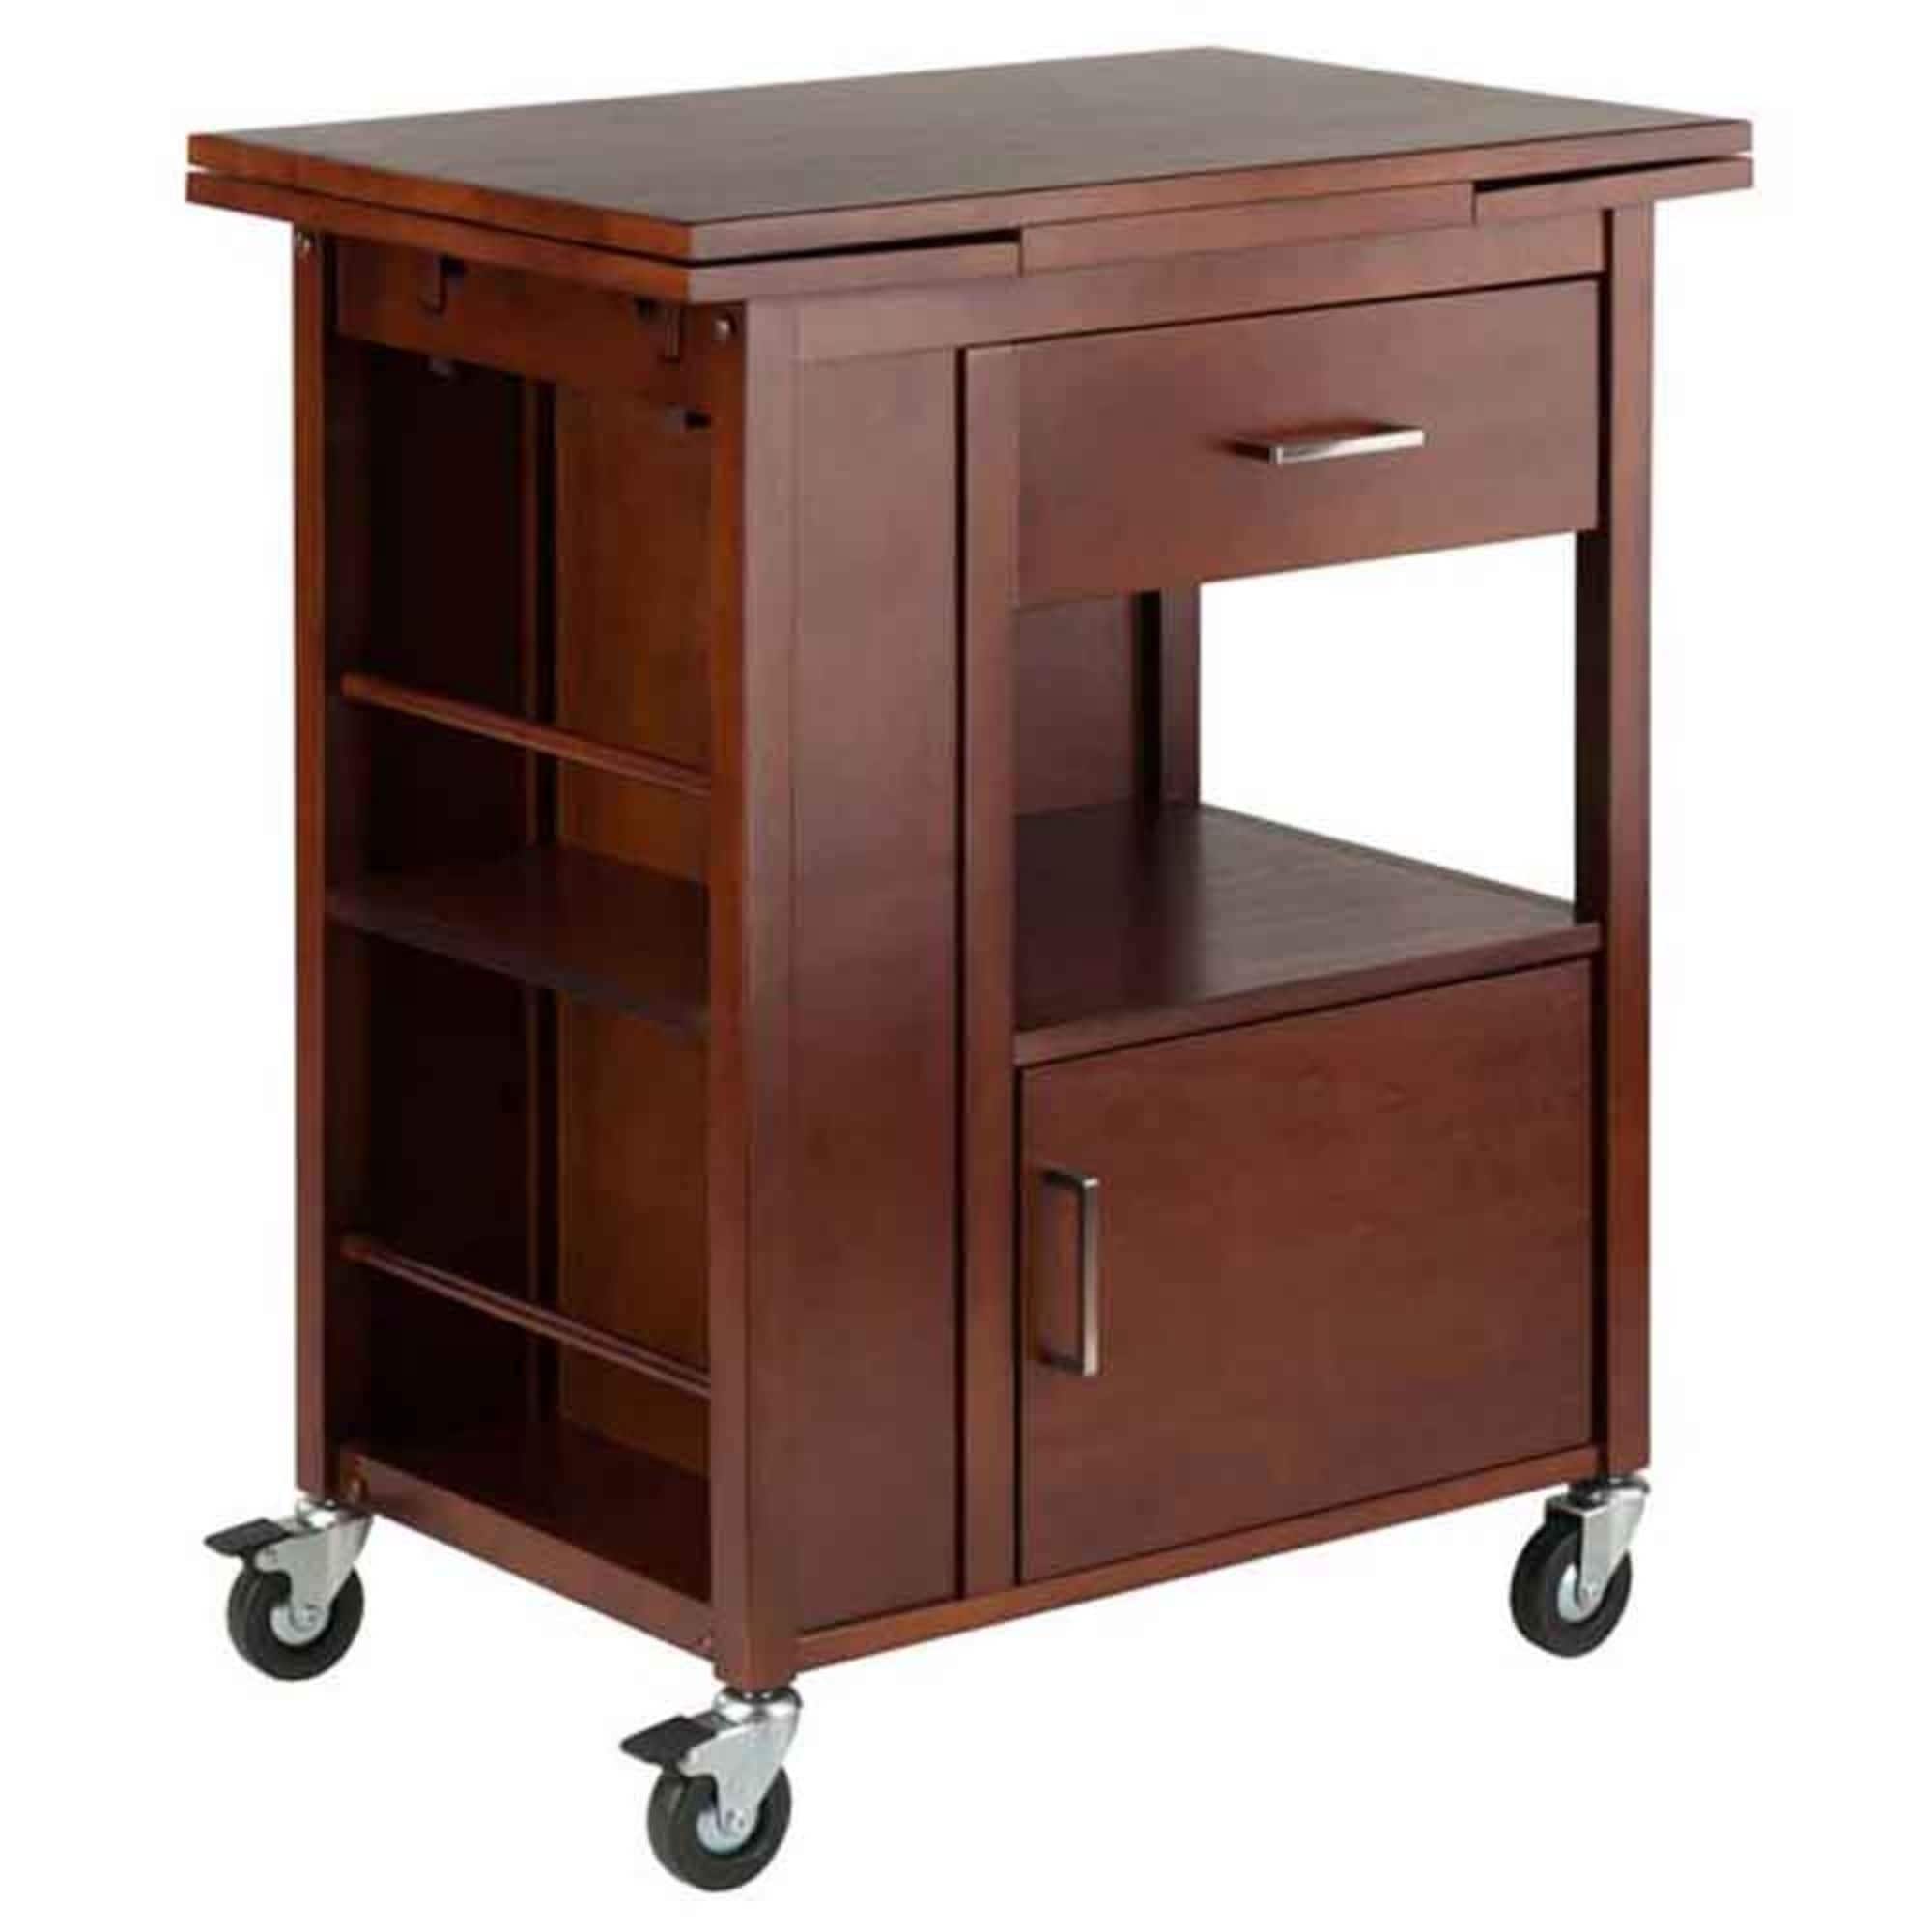 Offex Transitional Gregory Extendable Top Kitchen Cart, Walnut - 18.35 inchLx27.56 inchWx33.46 inchH